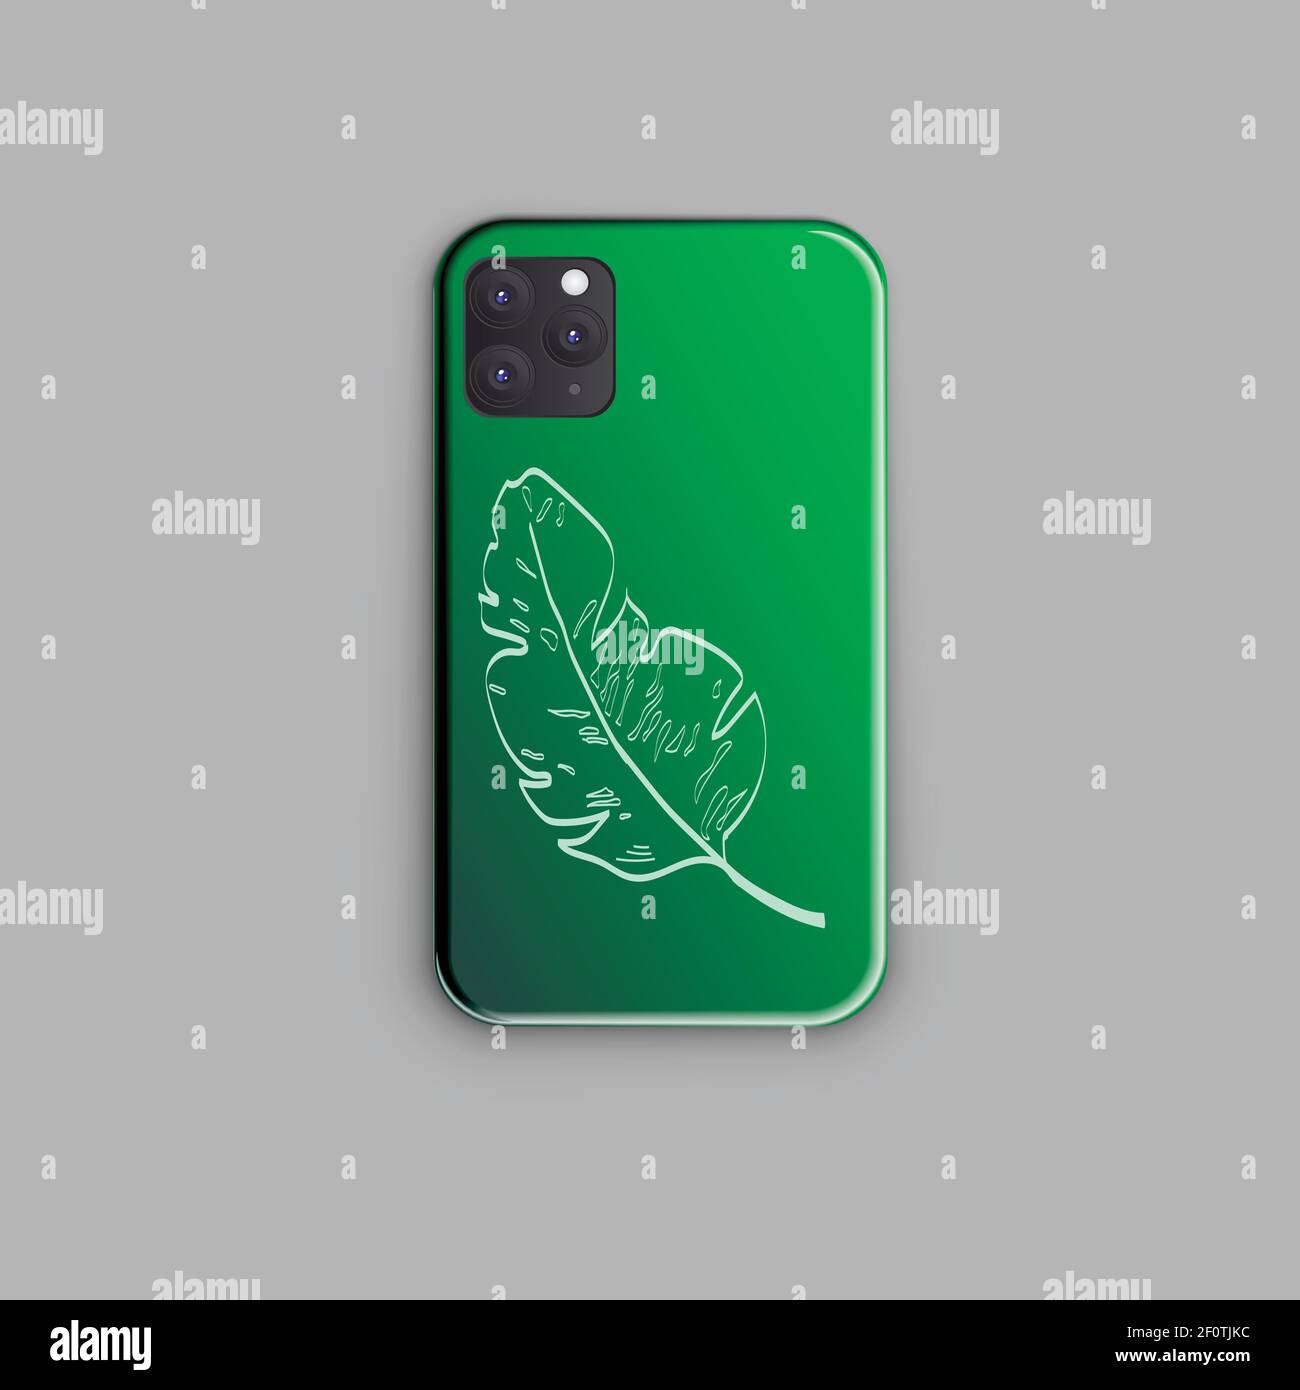 Stylish smartphone case design with beautiful green gradient design and tropical banana leaf sketch. Stylish smartphone mockup Stock Vector